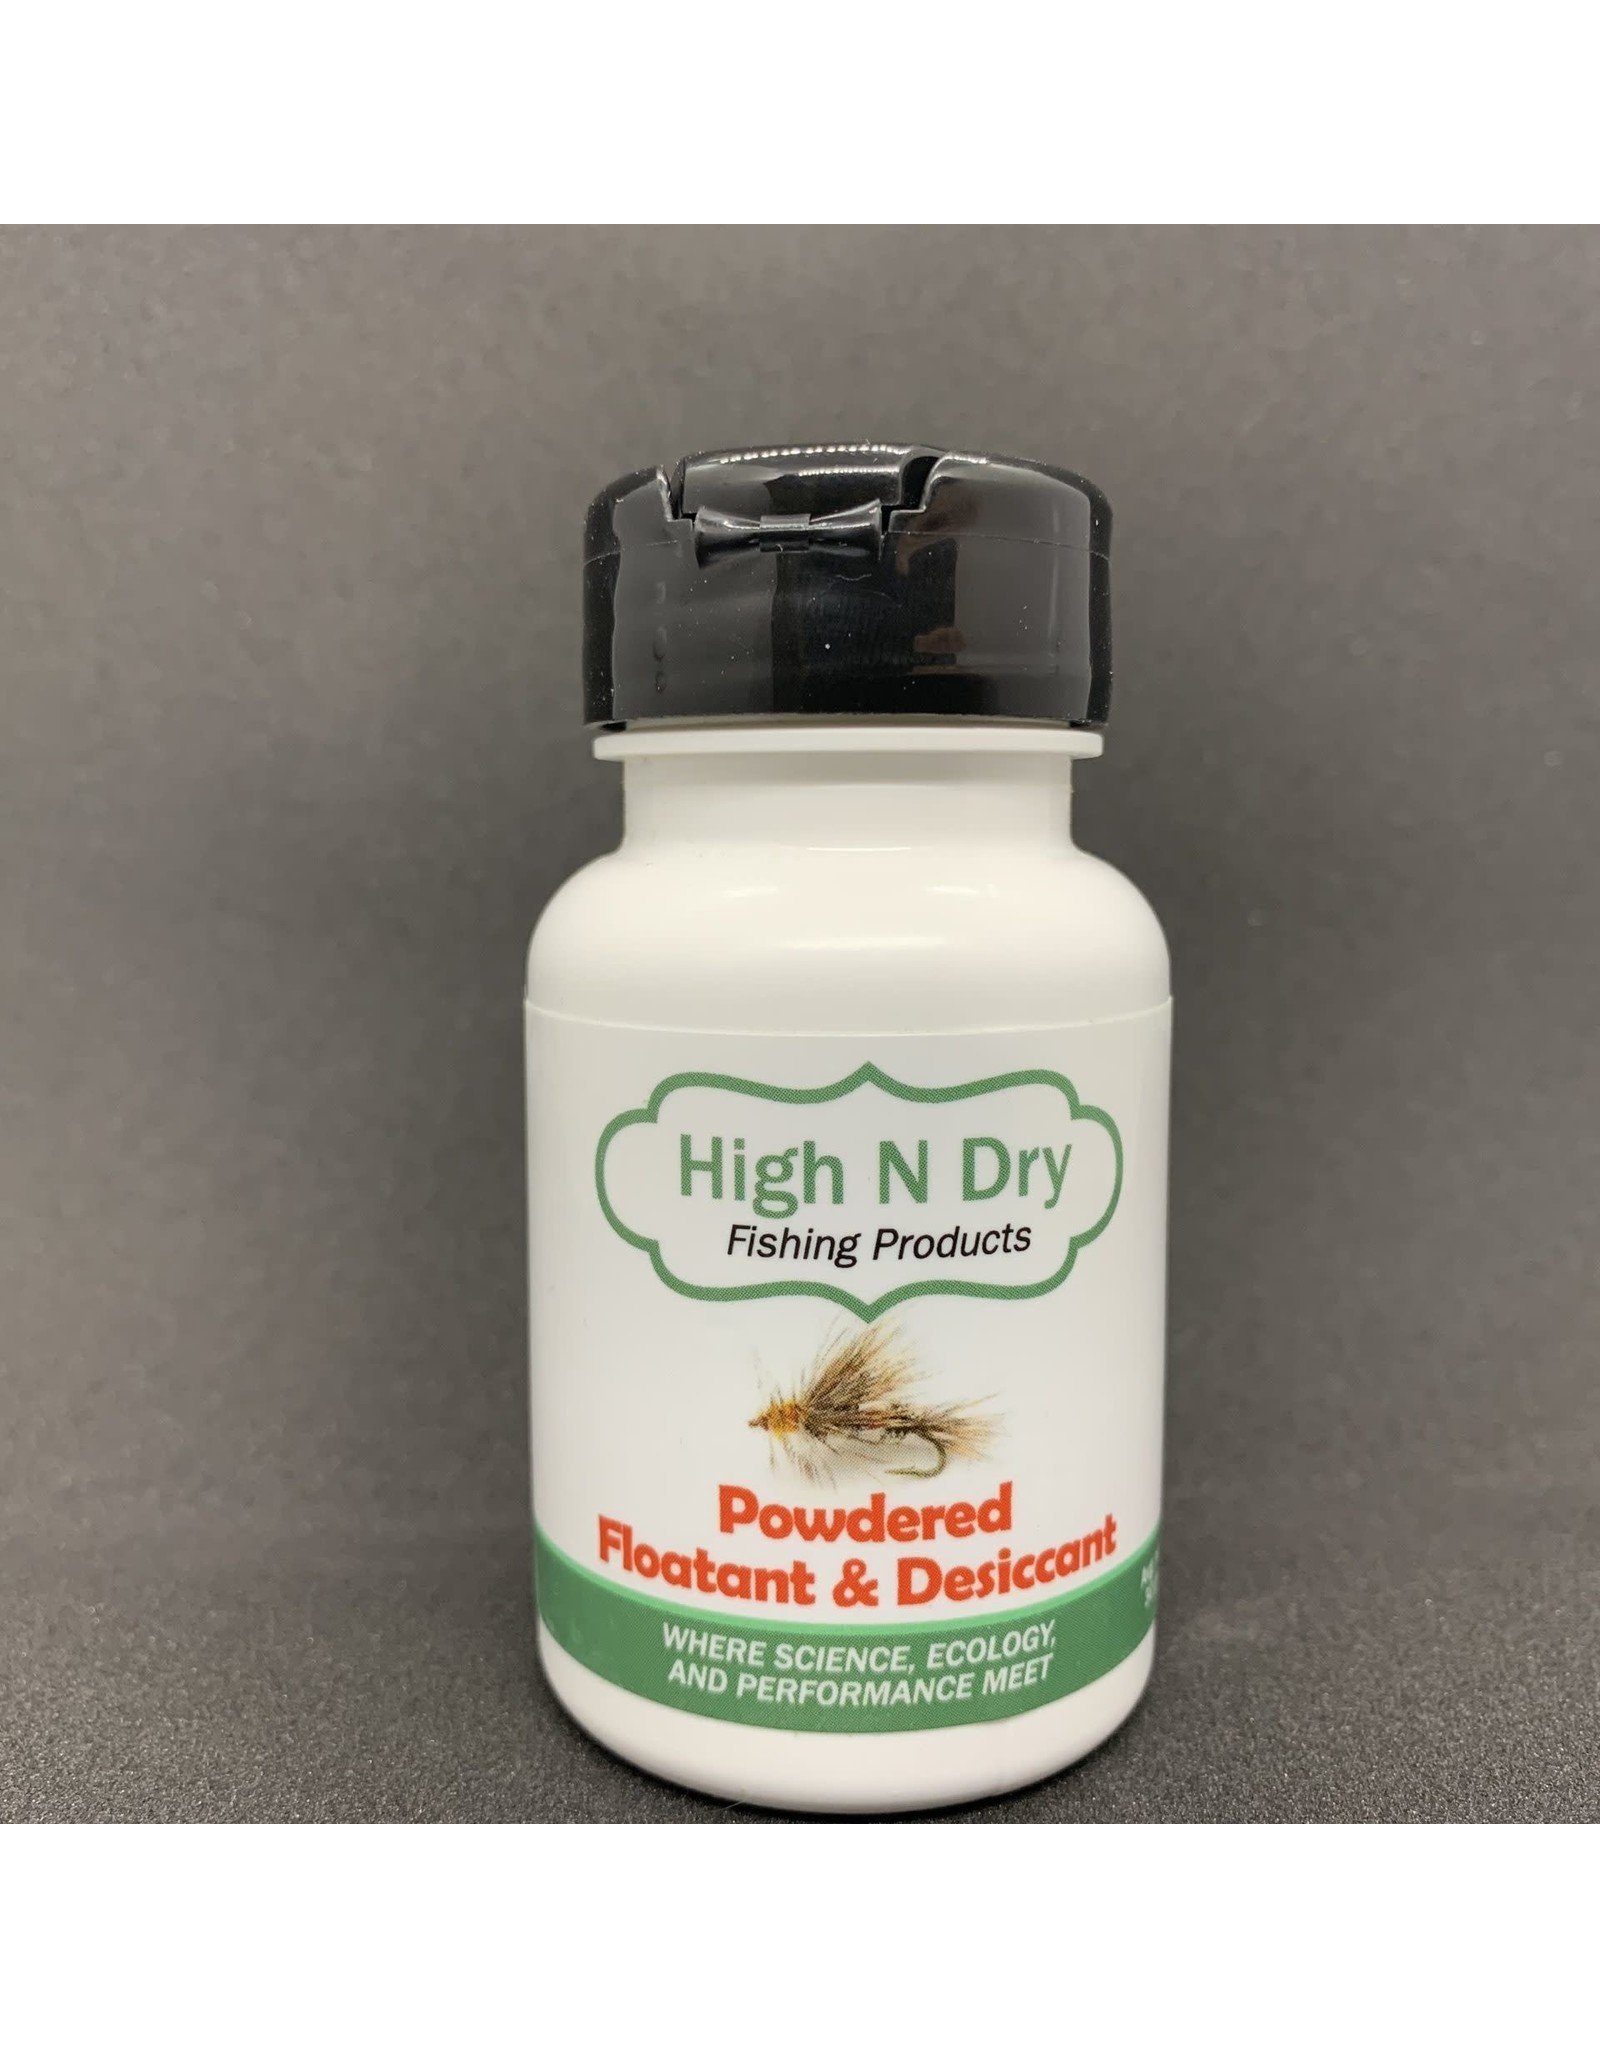 HIGH N DRY FISHING PRODUCTS HIGH N DRY Powdered Floatant & Desiccant